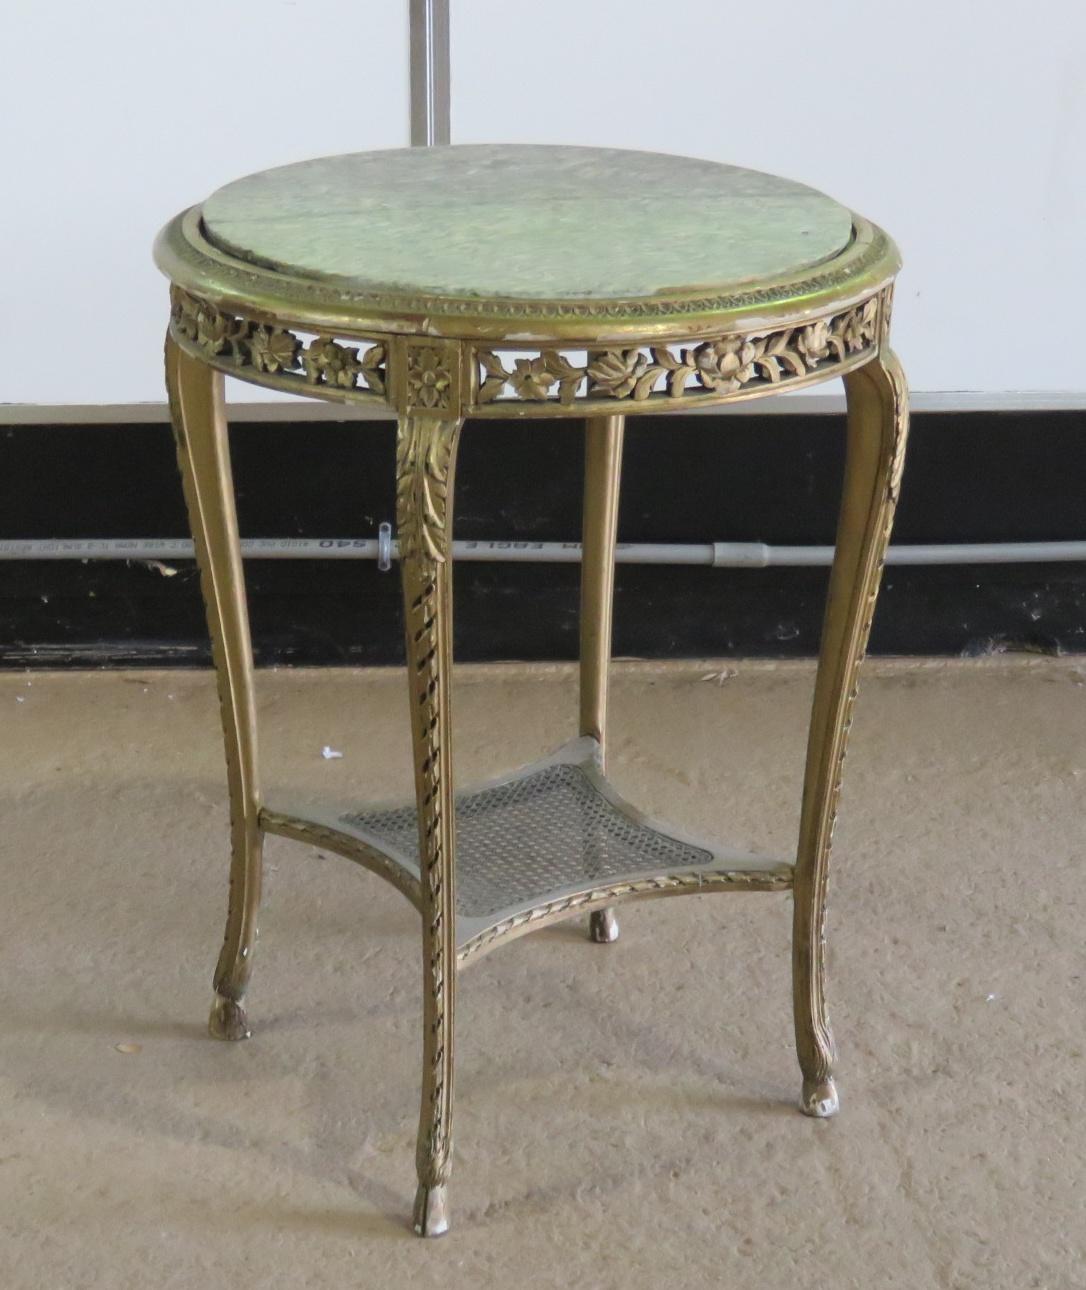 French marble top gilt paint decorated side table with a caned shelf on the bottom.